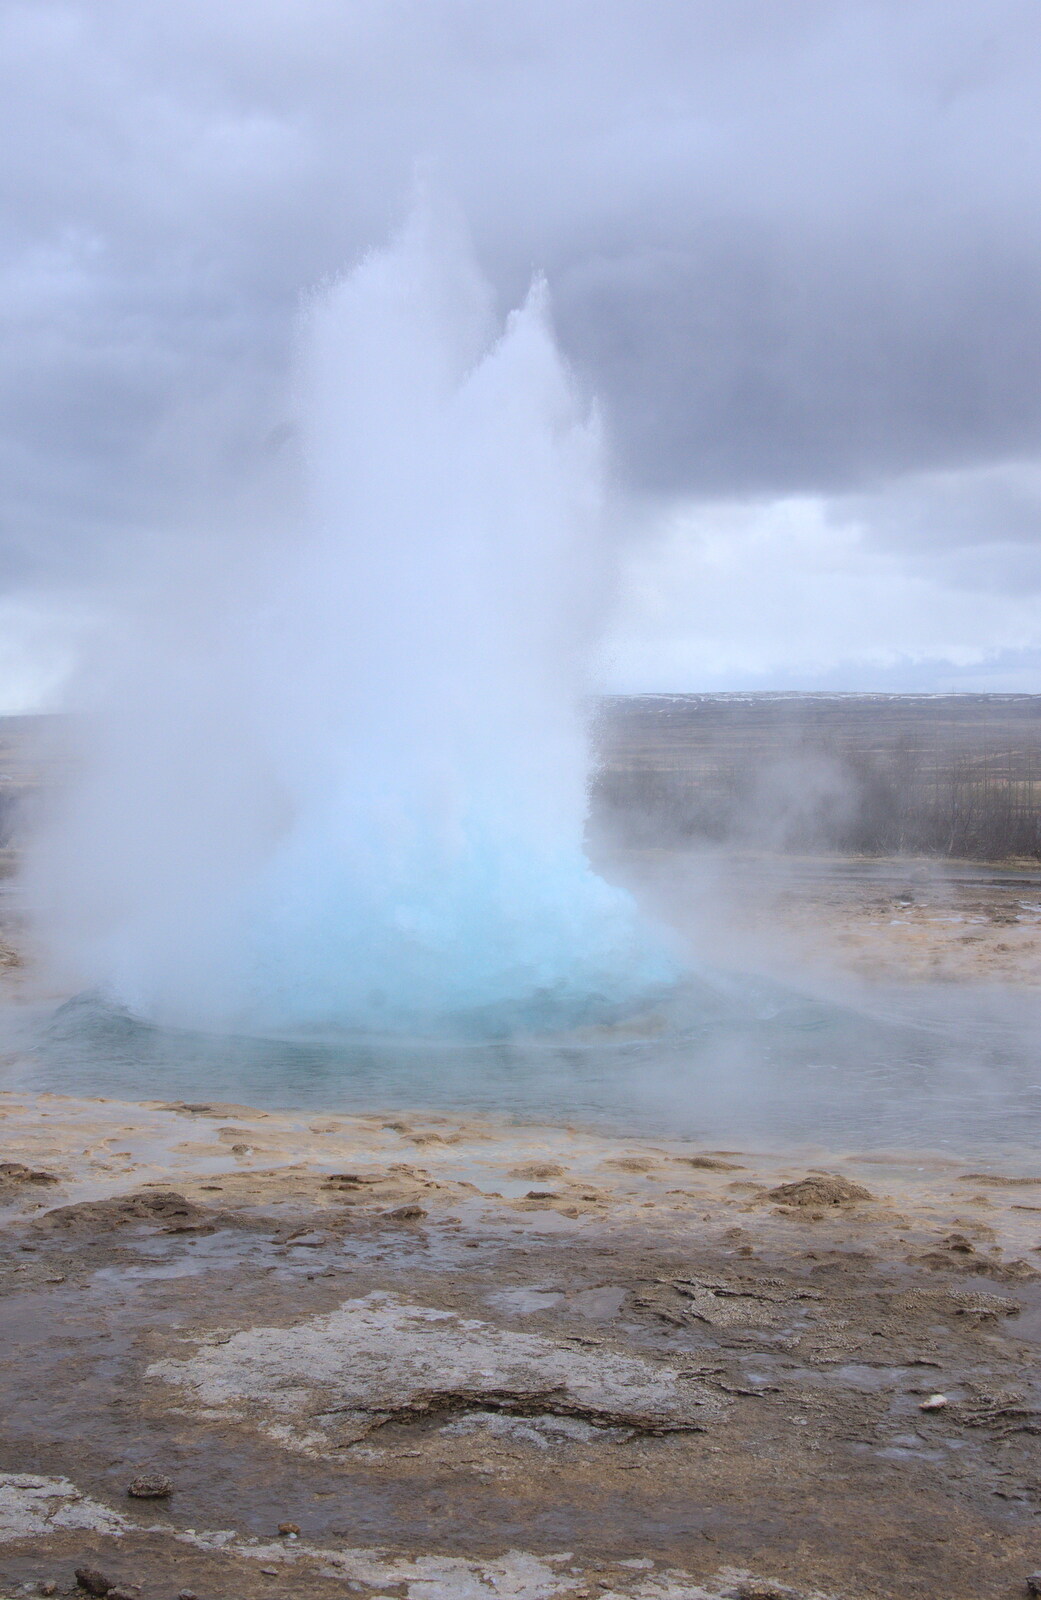 The Strokkur geyser blows one off from The Golden Circle of Ísland, Iceland - 22nd April 2017